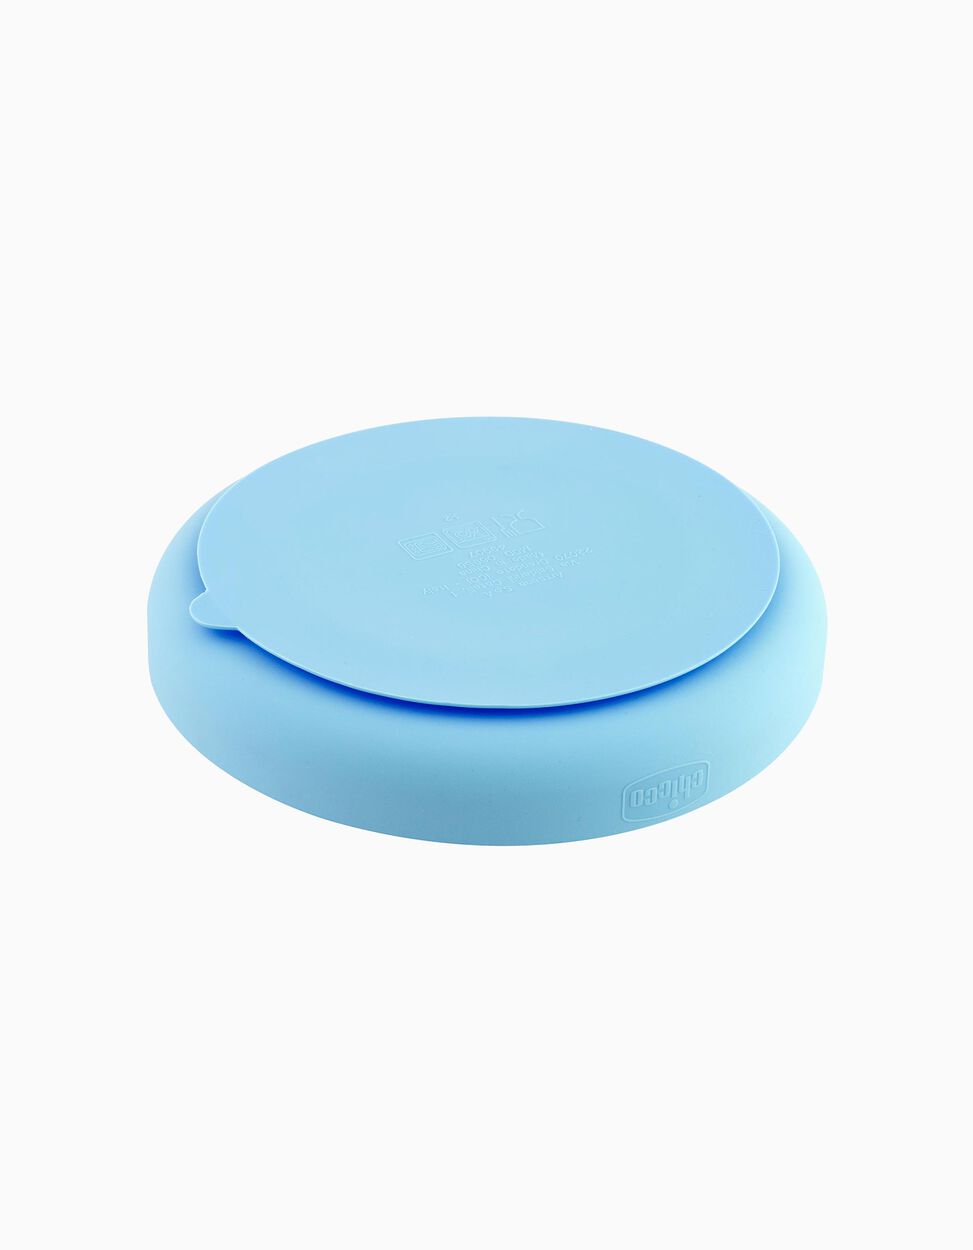 Silicone Plate with Sections, Eat Easy by Chicco, Blue